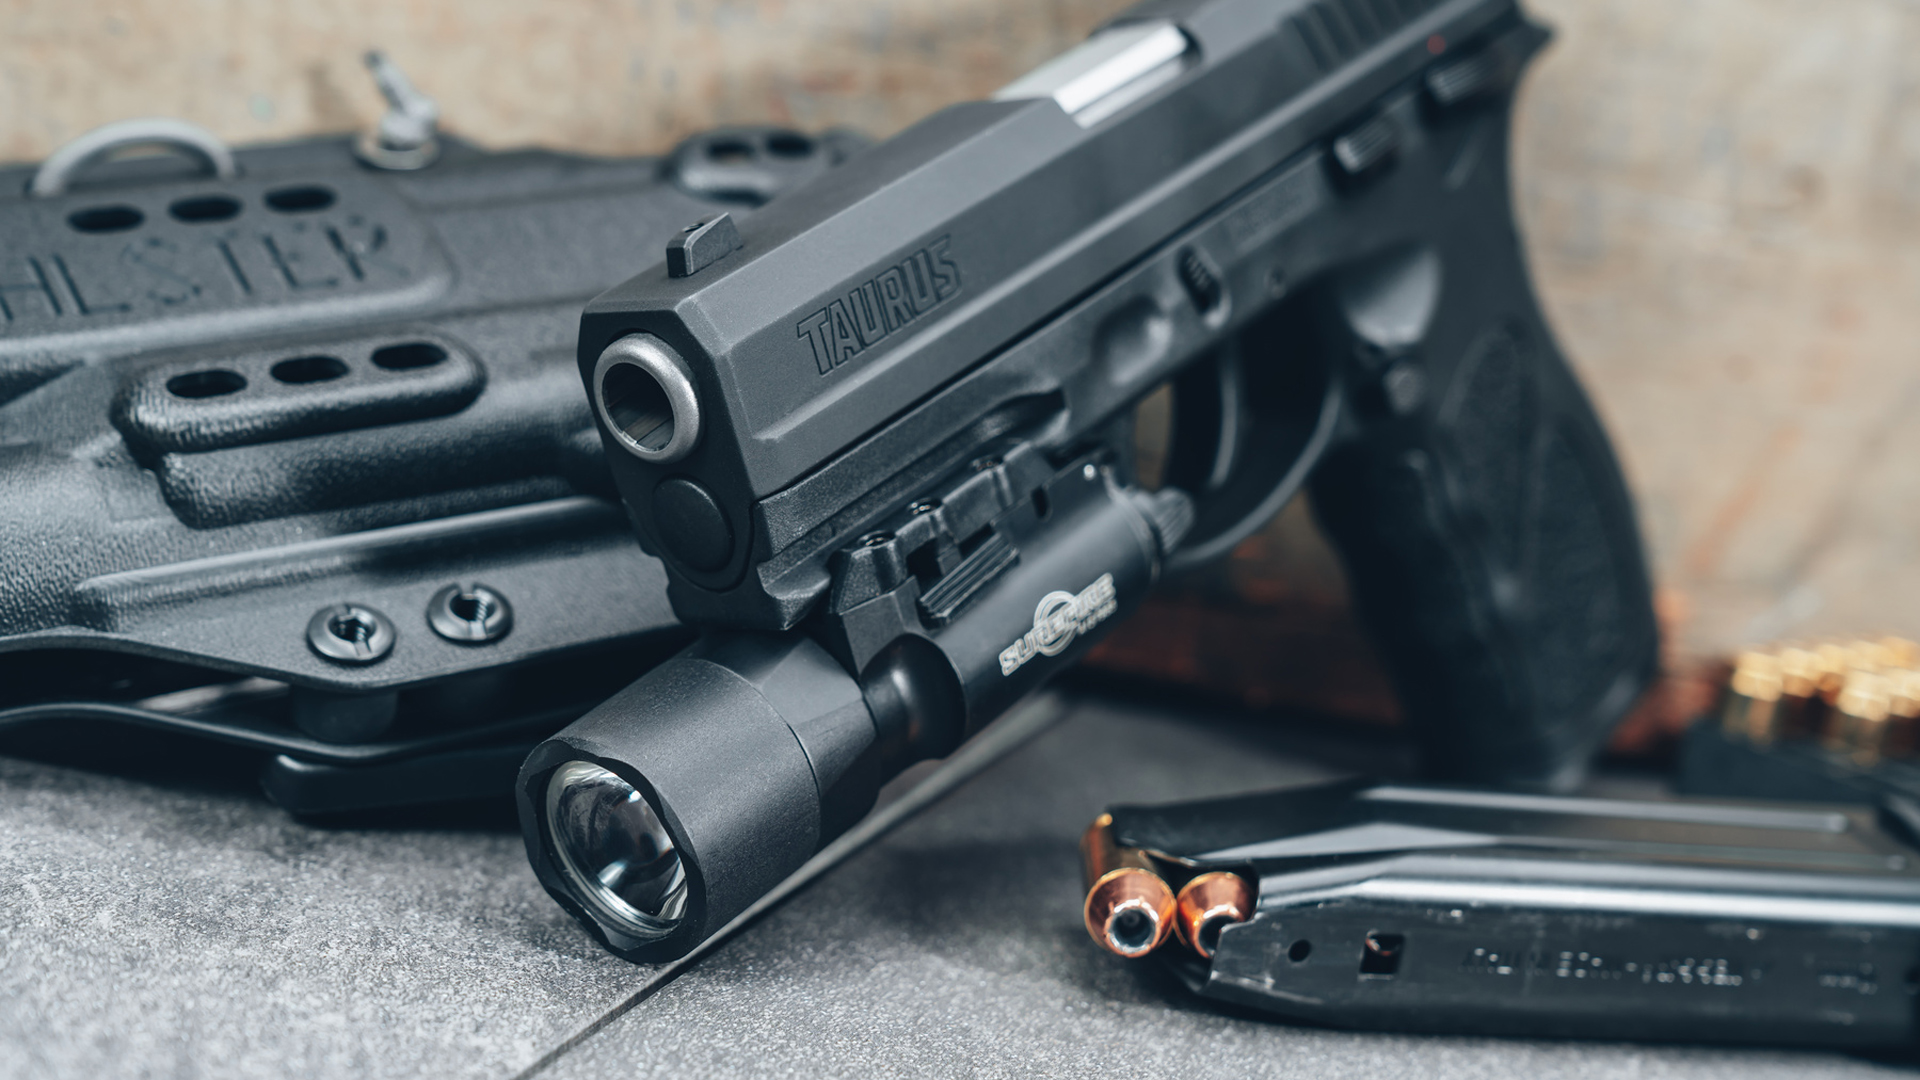 Taurus TH10 shown with a SureFire weaponlight mounted to its accessory rail.